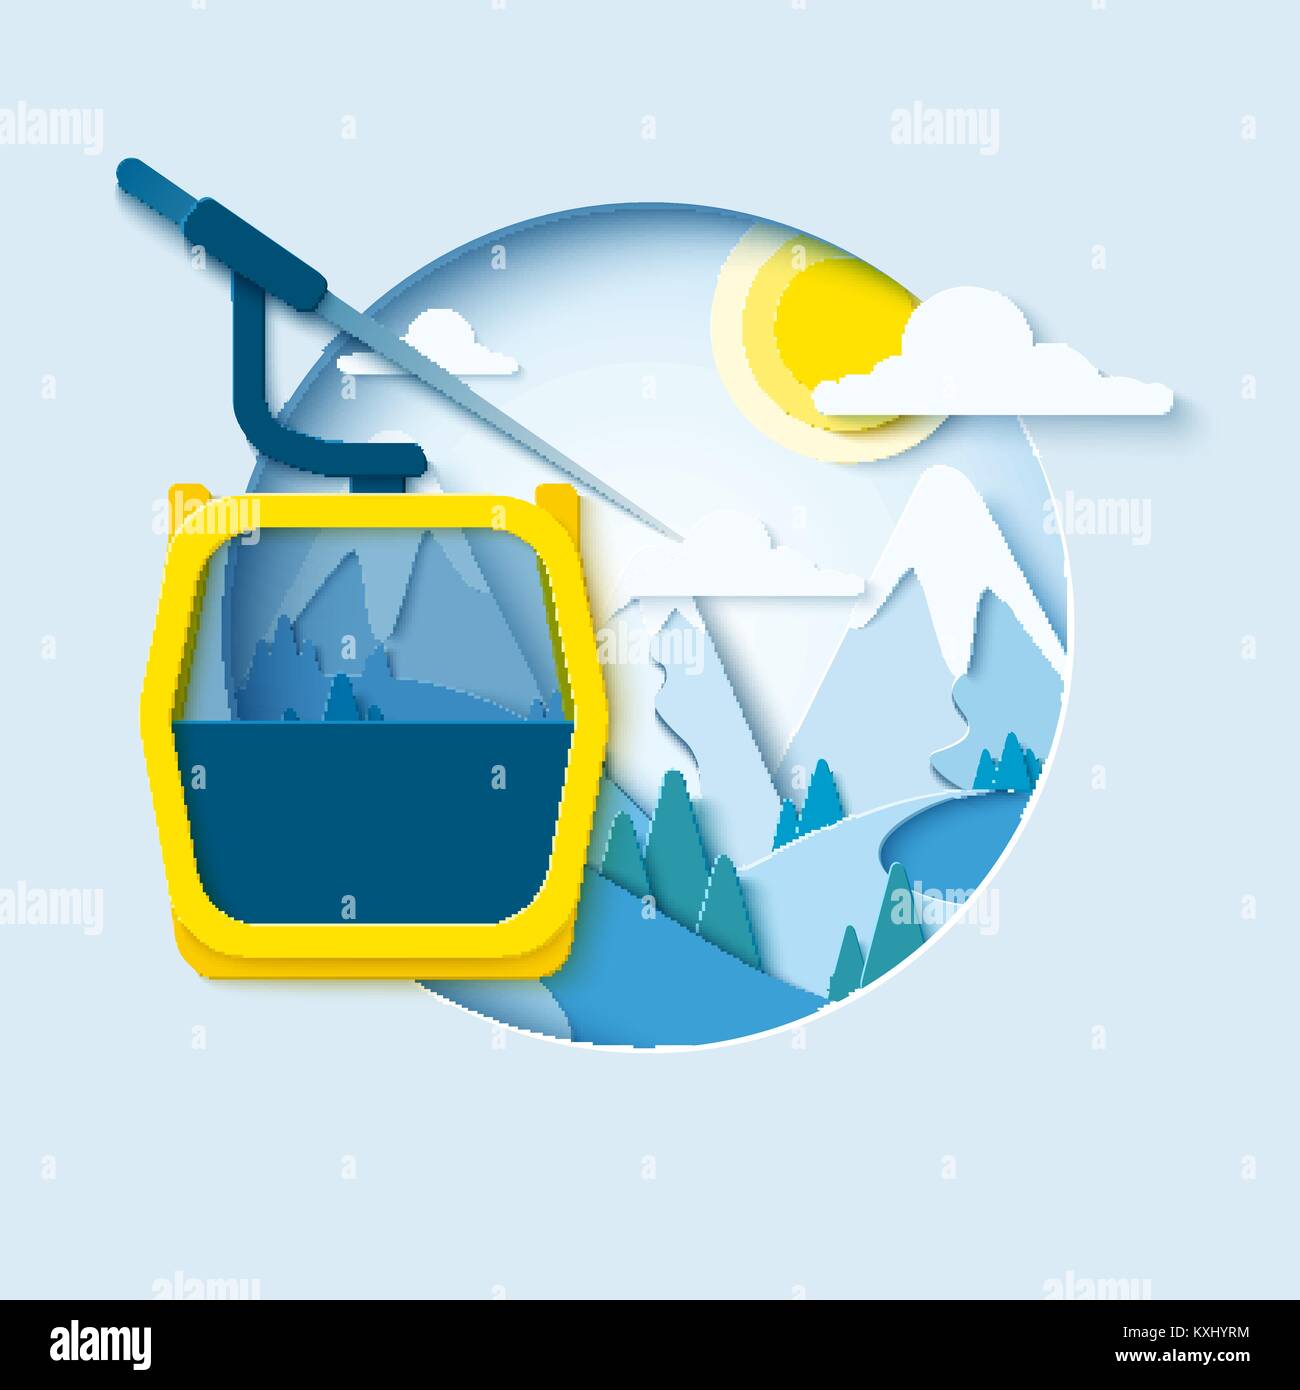 Ski cableway paper cut banner. Winter mountain paper landscape background with ski lift cabine. Vector poster for skiing resort Stock Vector